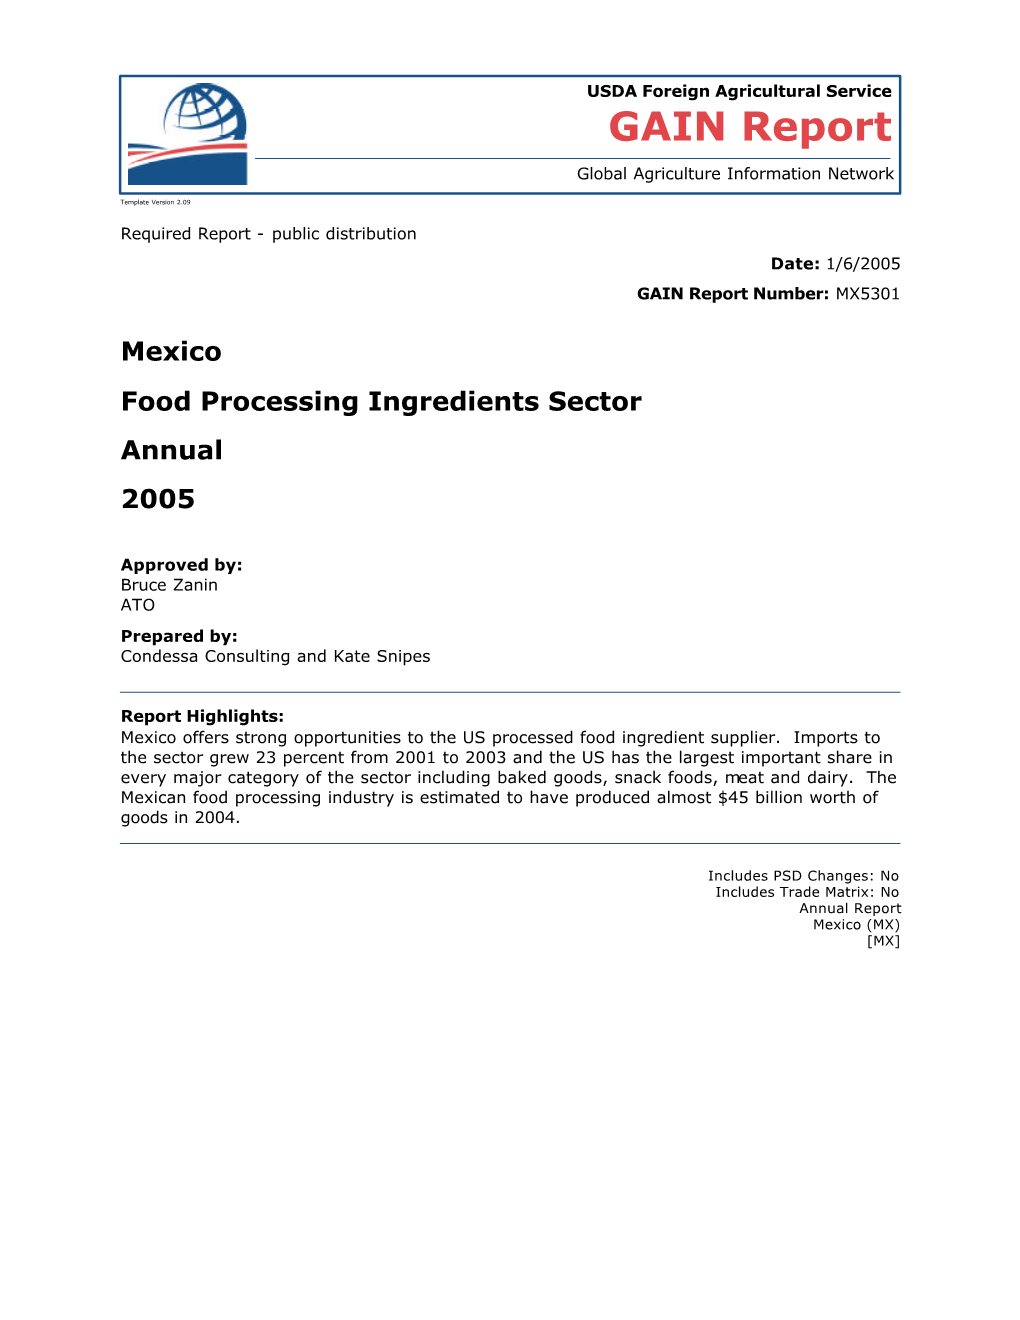 Food Processing Ingredients Sector Annual 2005